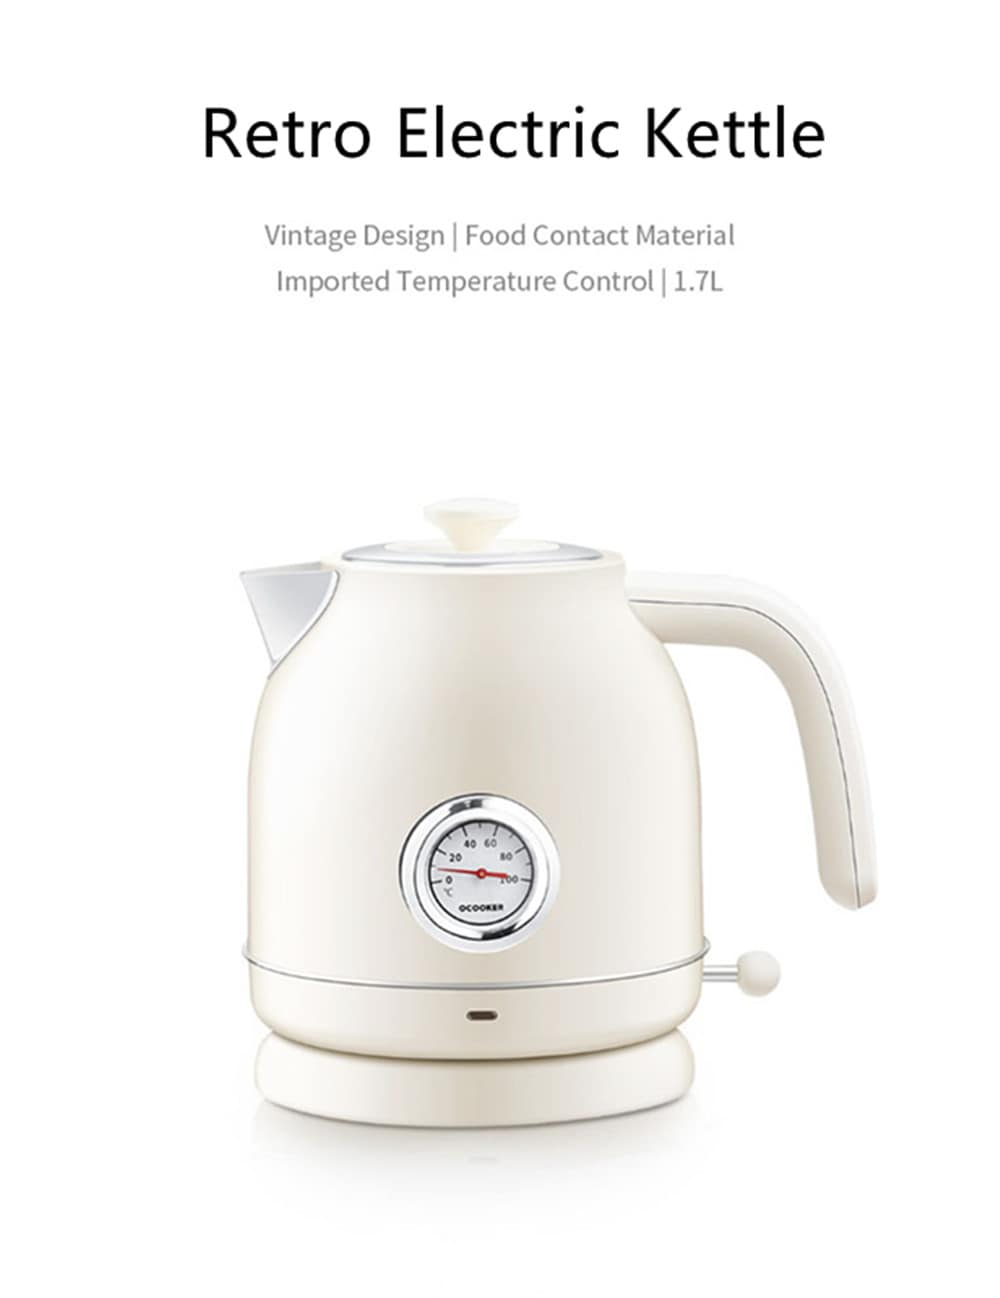 QCOOKER 1.7L / 1800W Retro Electric Kettle with Watch Thermometer Display from Xiaomi- Hazel Green